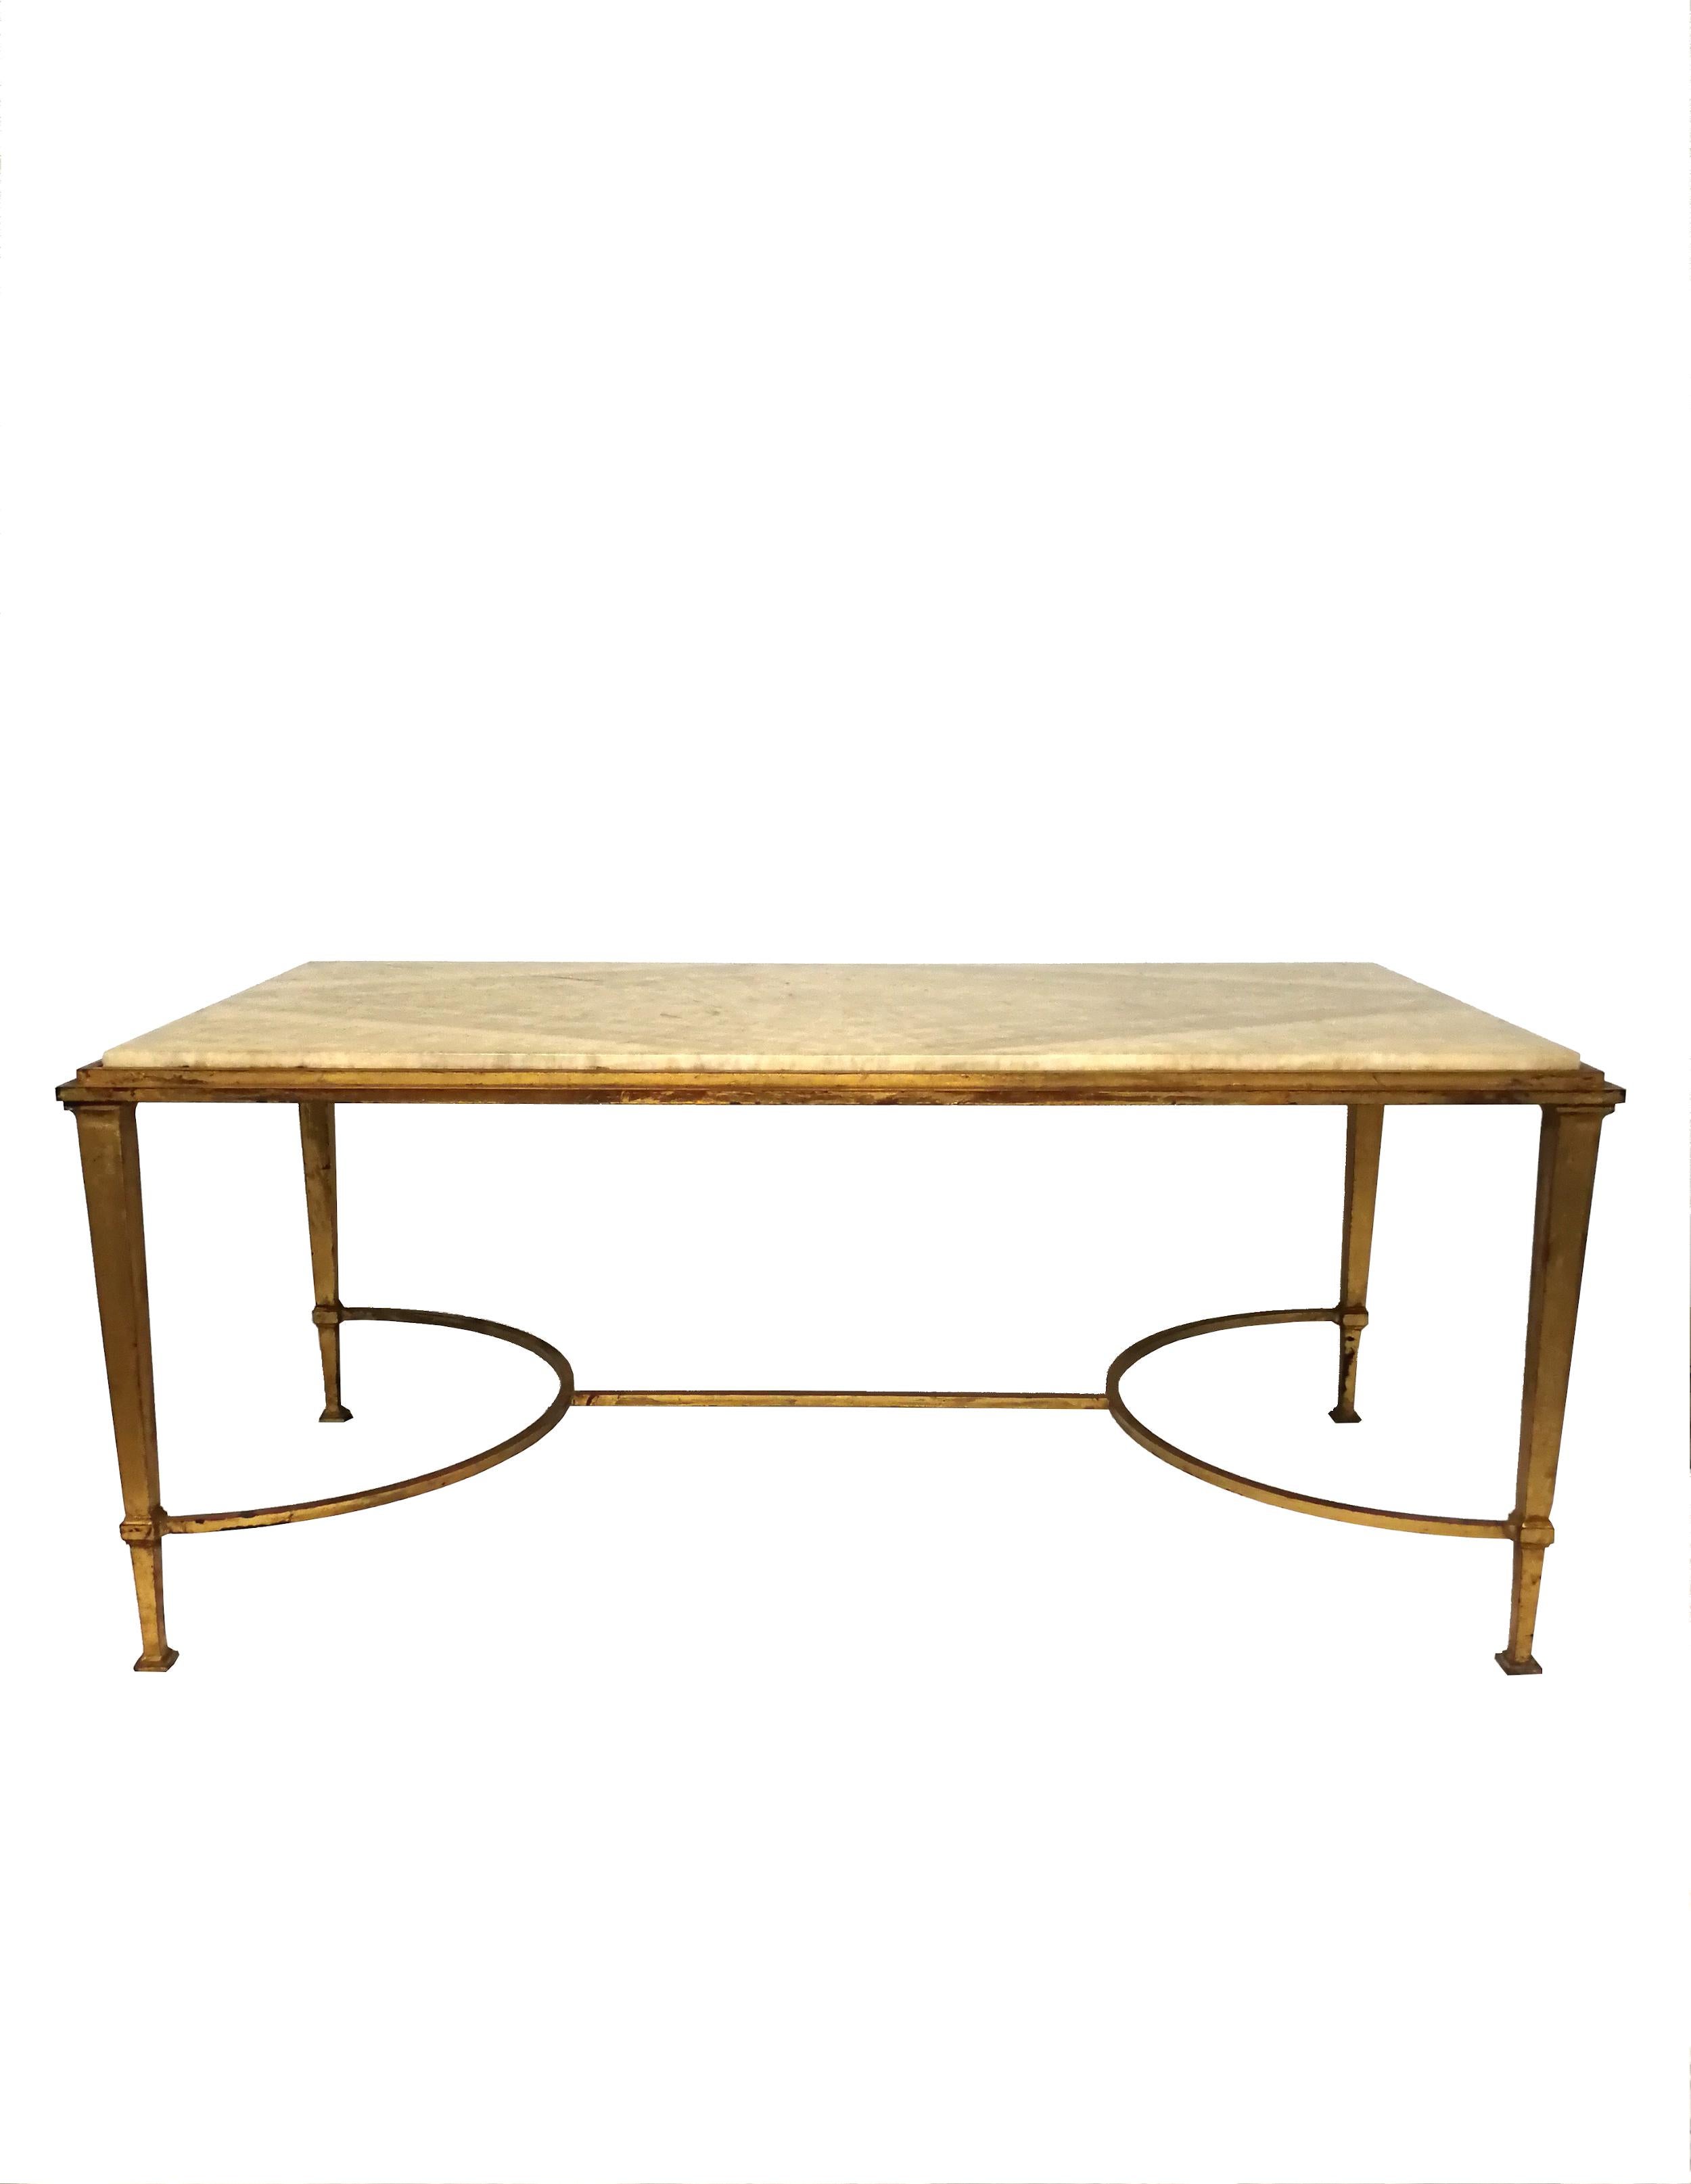 Superb coffee table designed by Maison Ramsay with gold leaf patinated beaten iron structure and rectangular light green onyx 